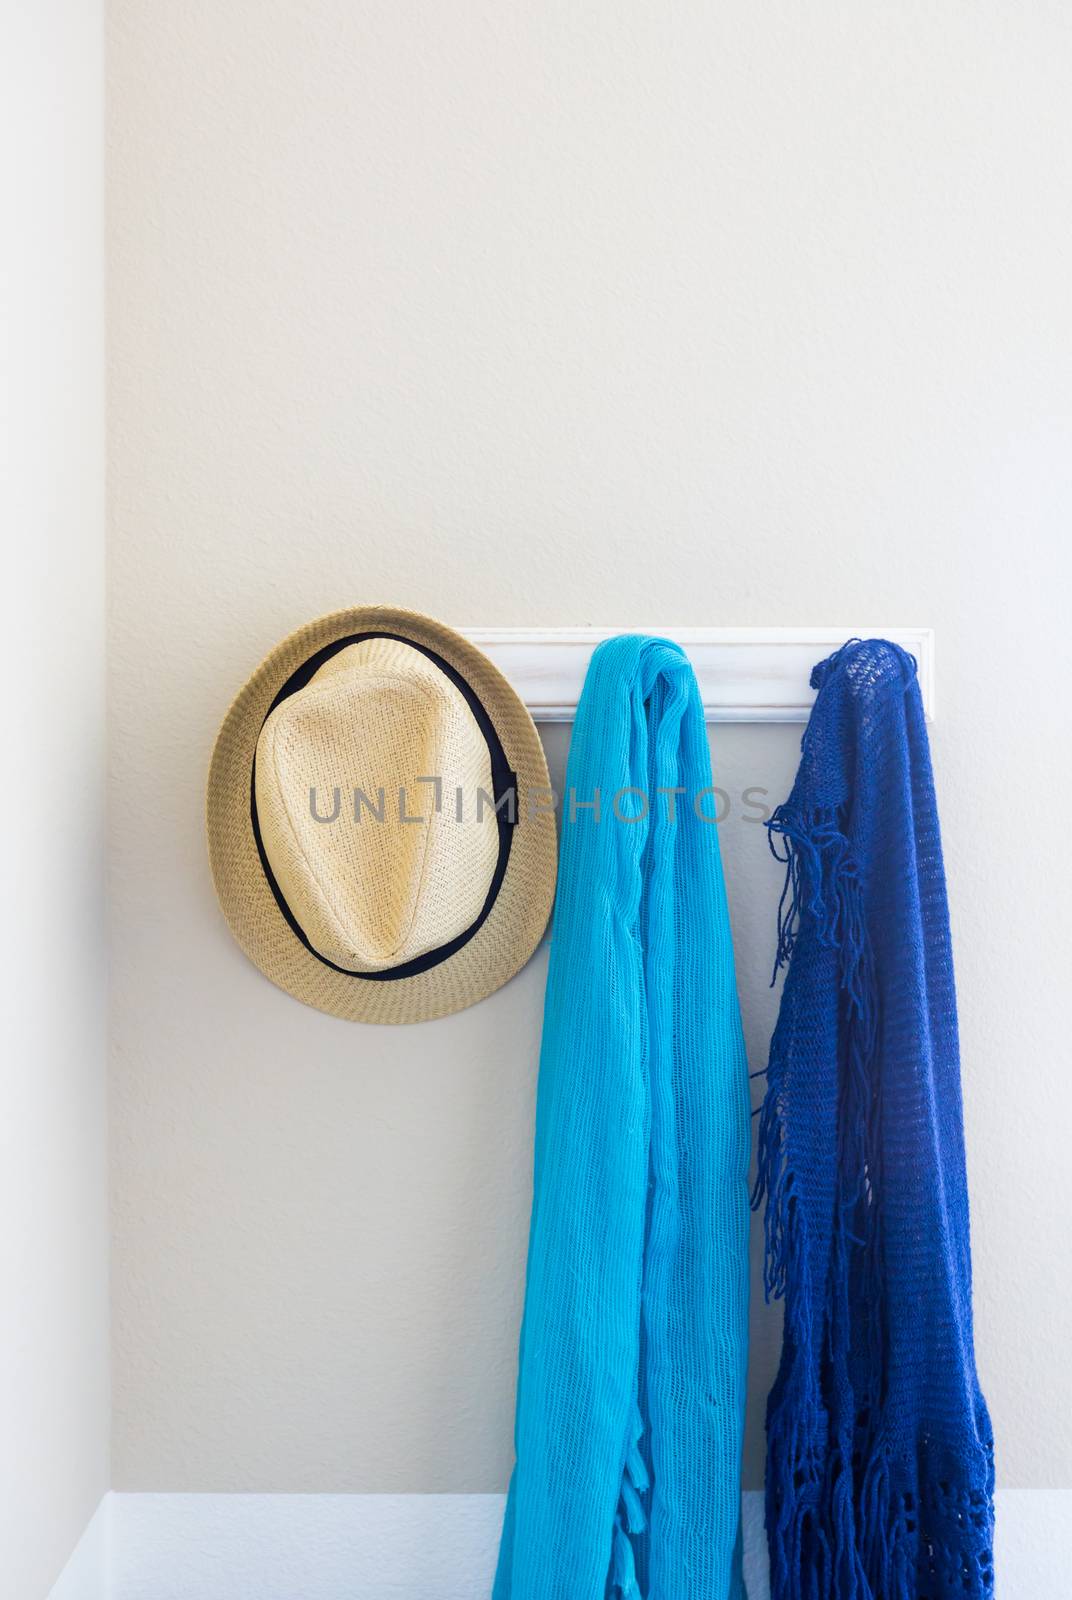 Wall in House with Hat and Scarfs Hanging on Coat Rack Hooks Abstract. by Feverpitched